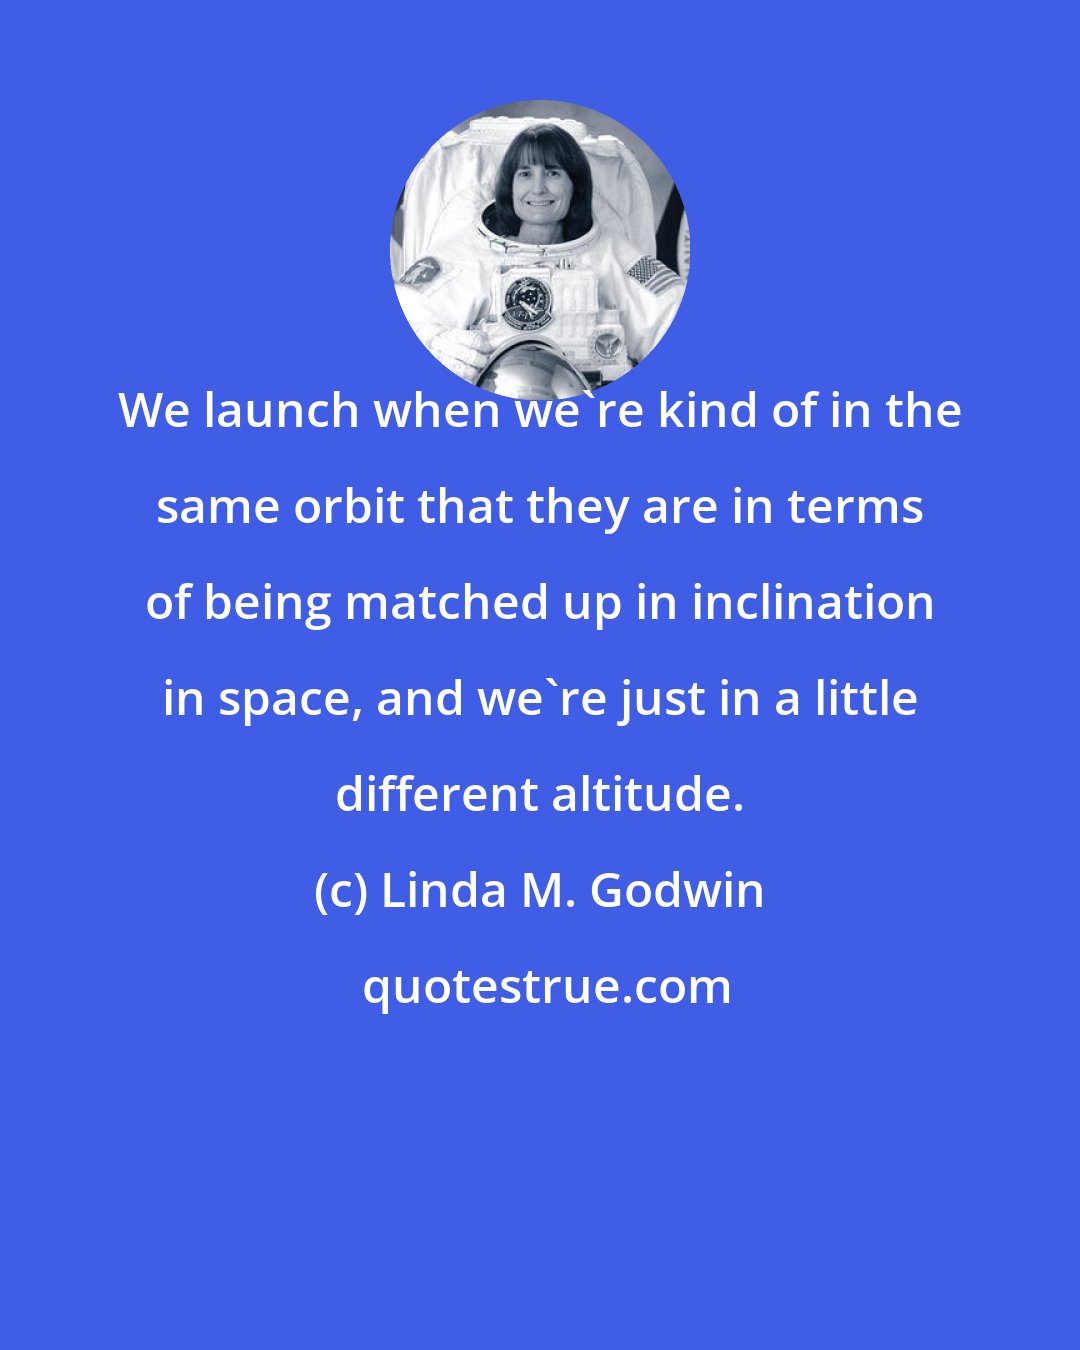 Linda M. Godwin: We launch when we're kind of in the same orbit that they are in terms of being matched up in inclination in space, and we're just in a little different altitude.